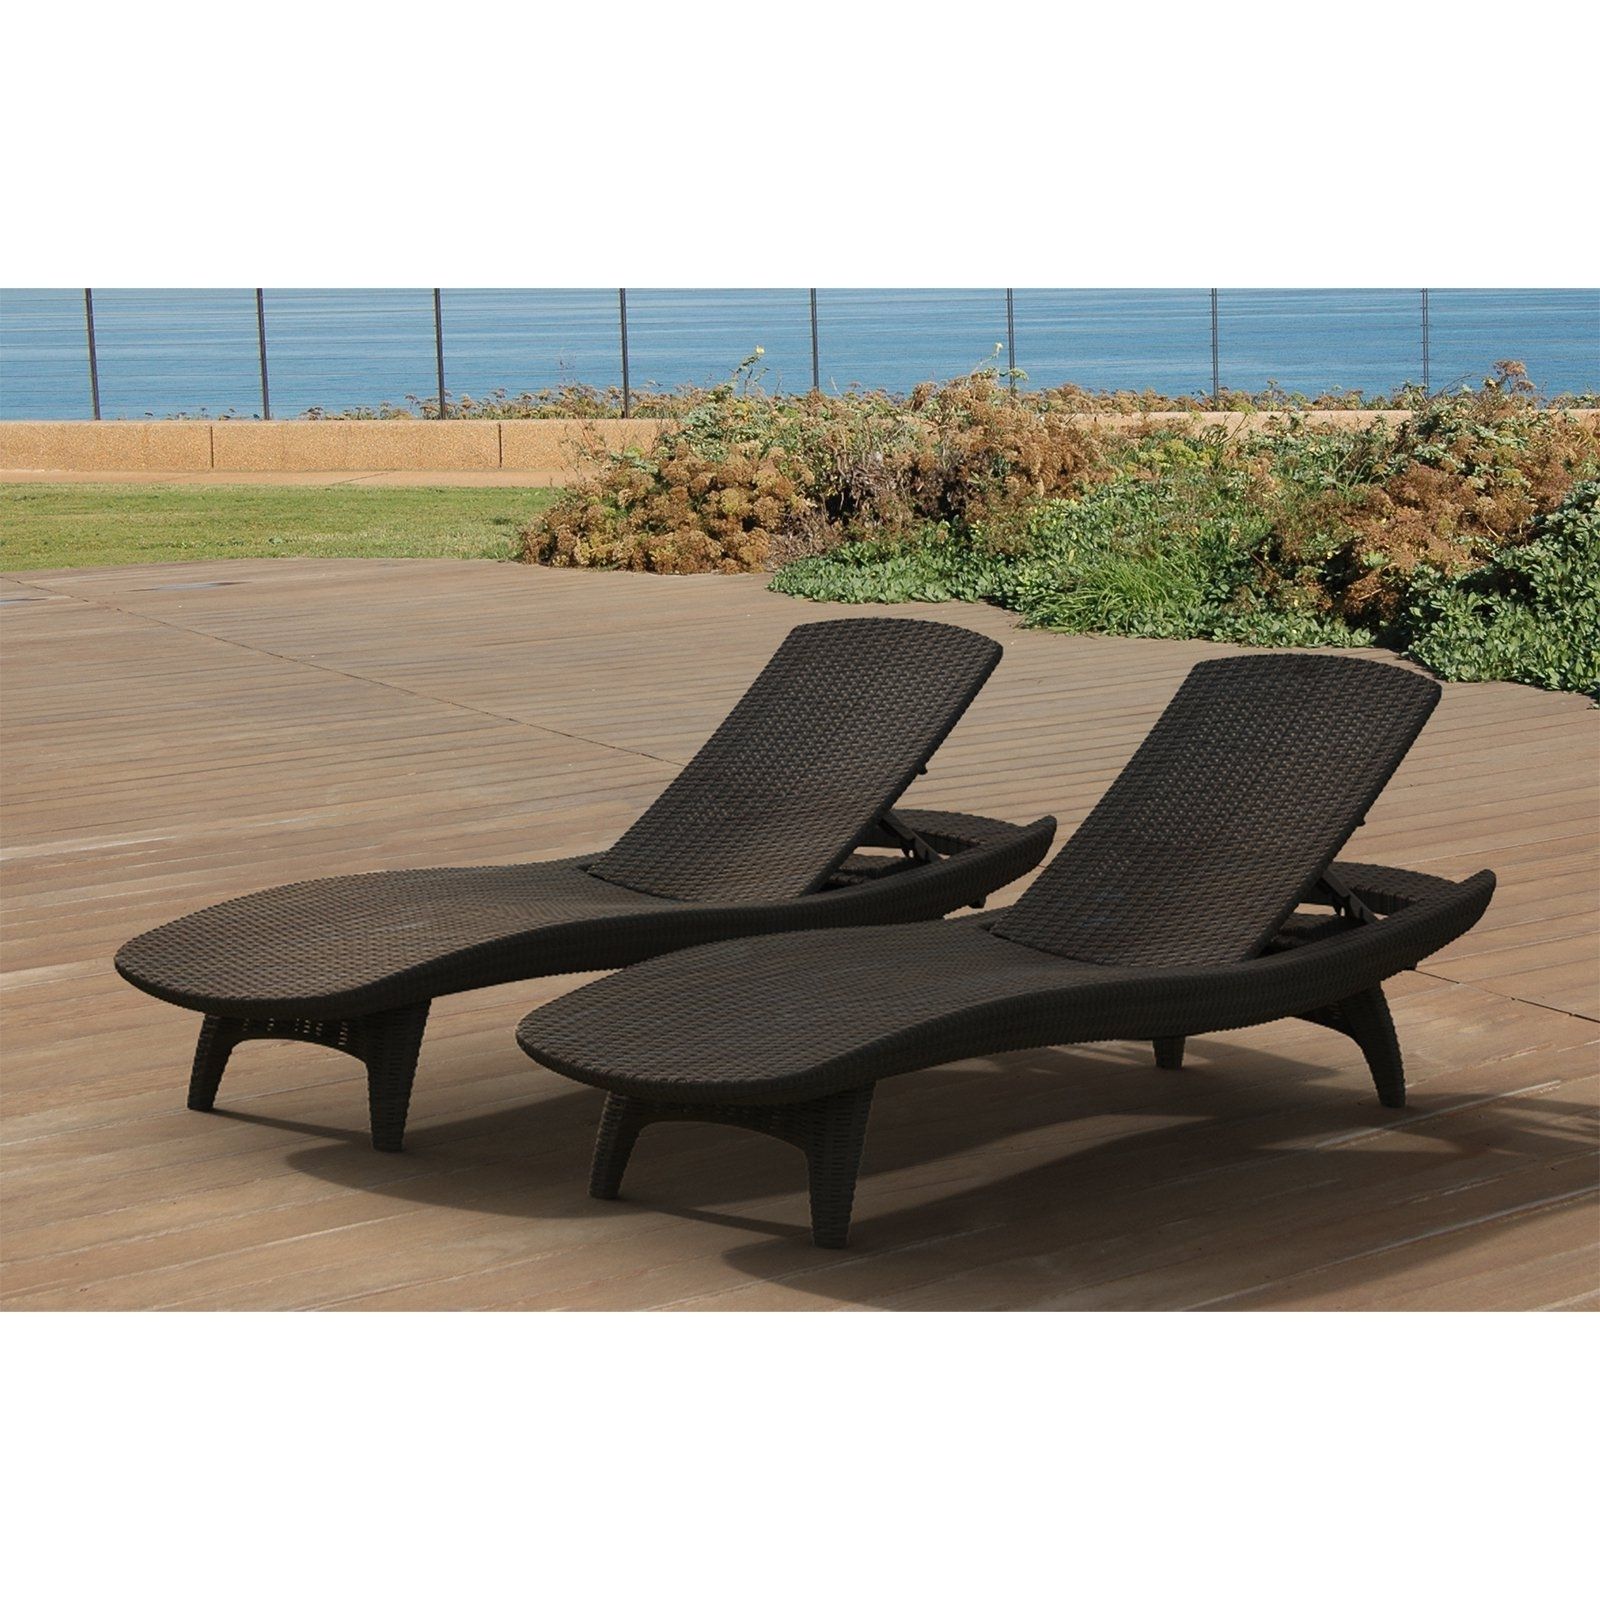 Most Recently Released Hotel Chaise Lounge Chairs • Lounge Chairs Ideas With Hotel Chaise Lounge Chairs (View 1 of 15)